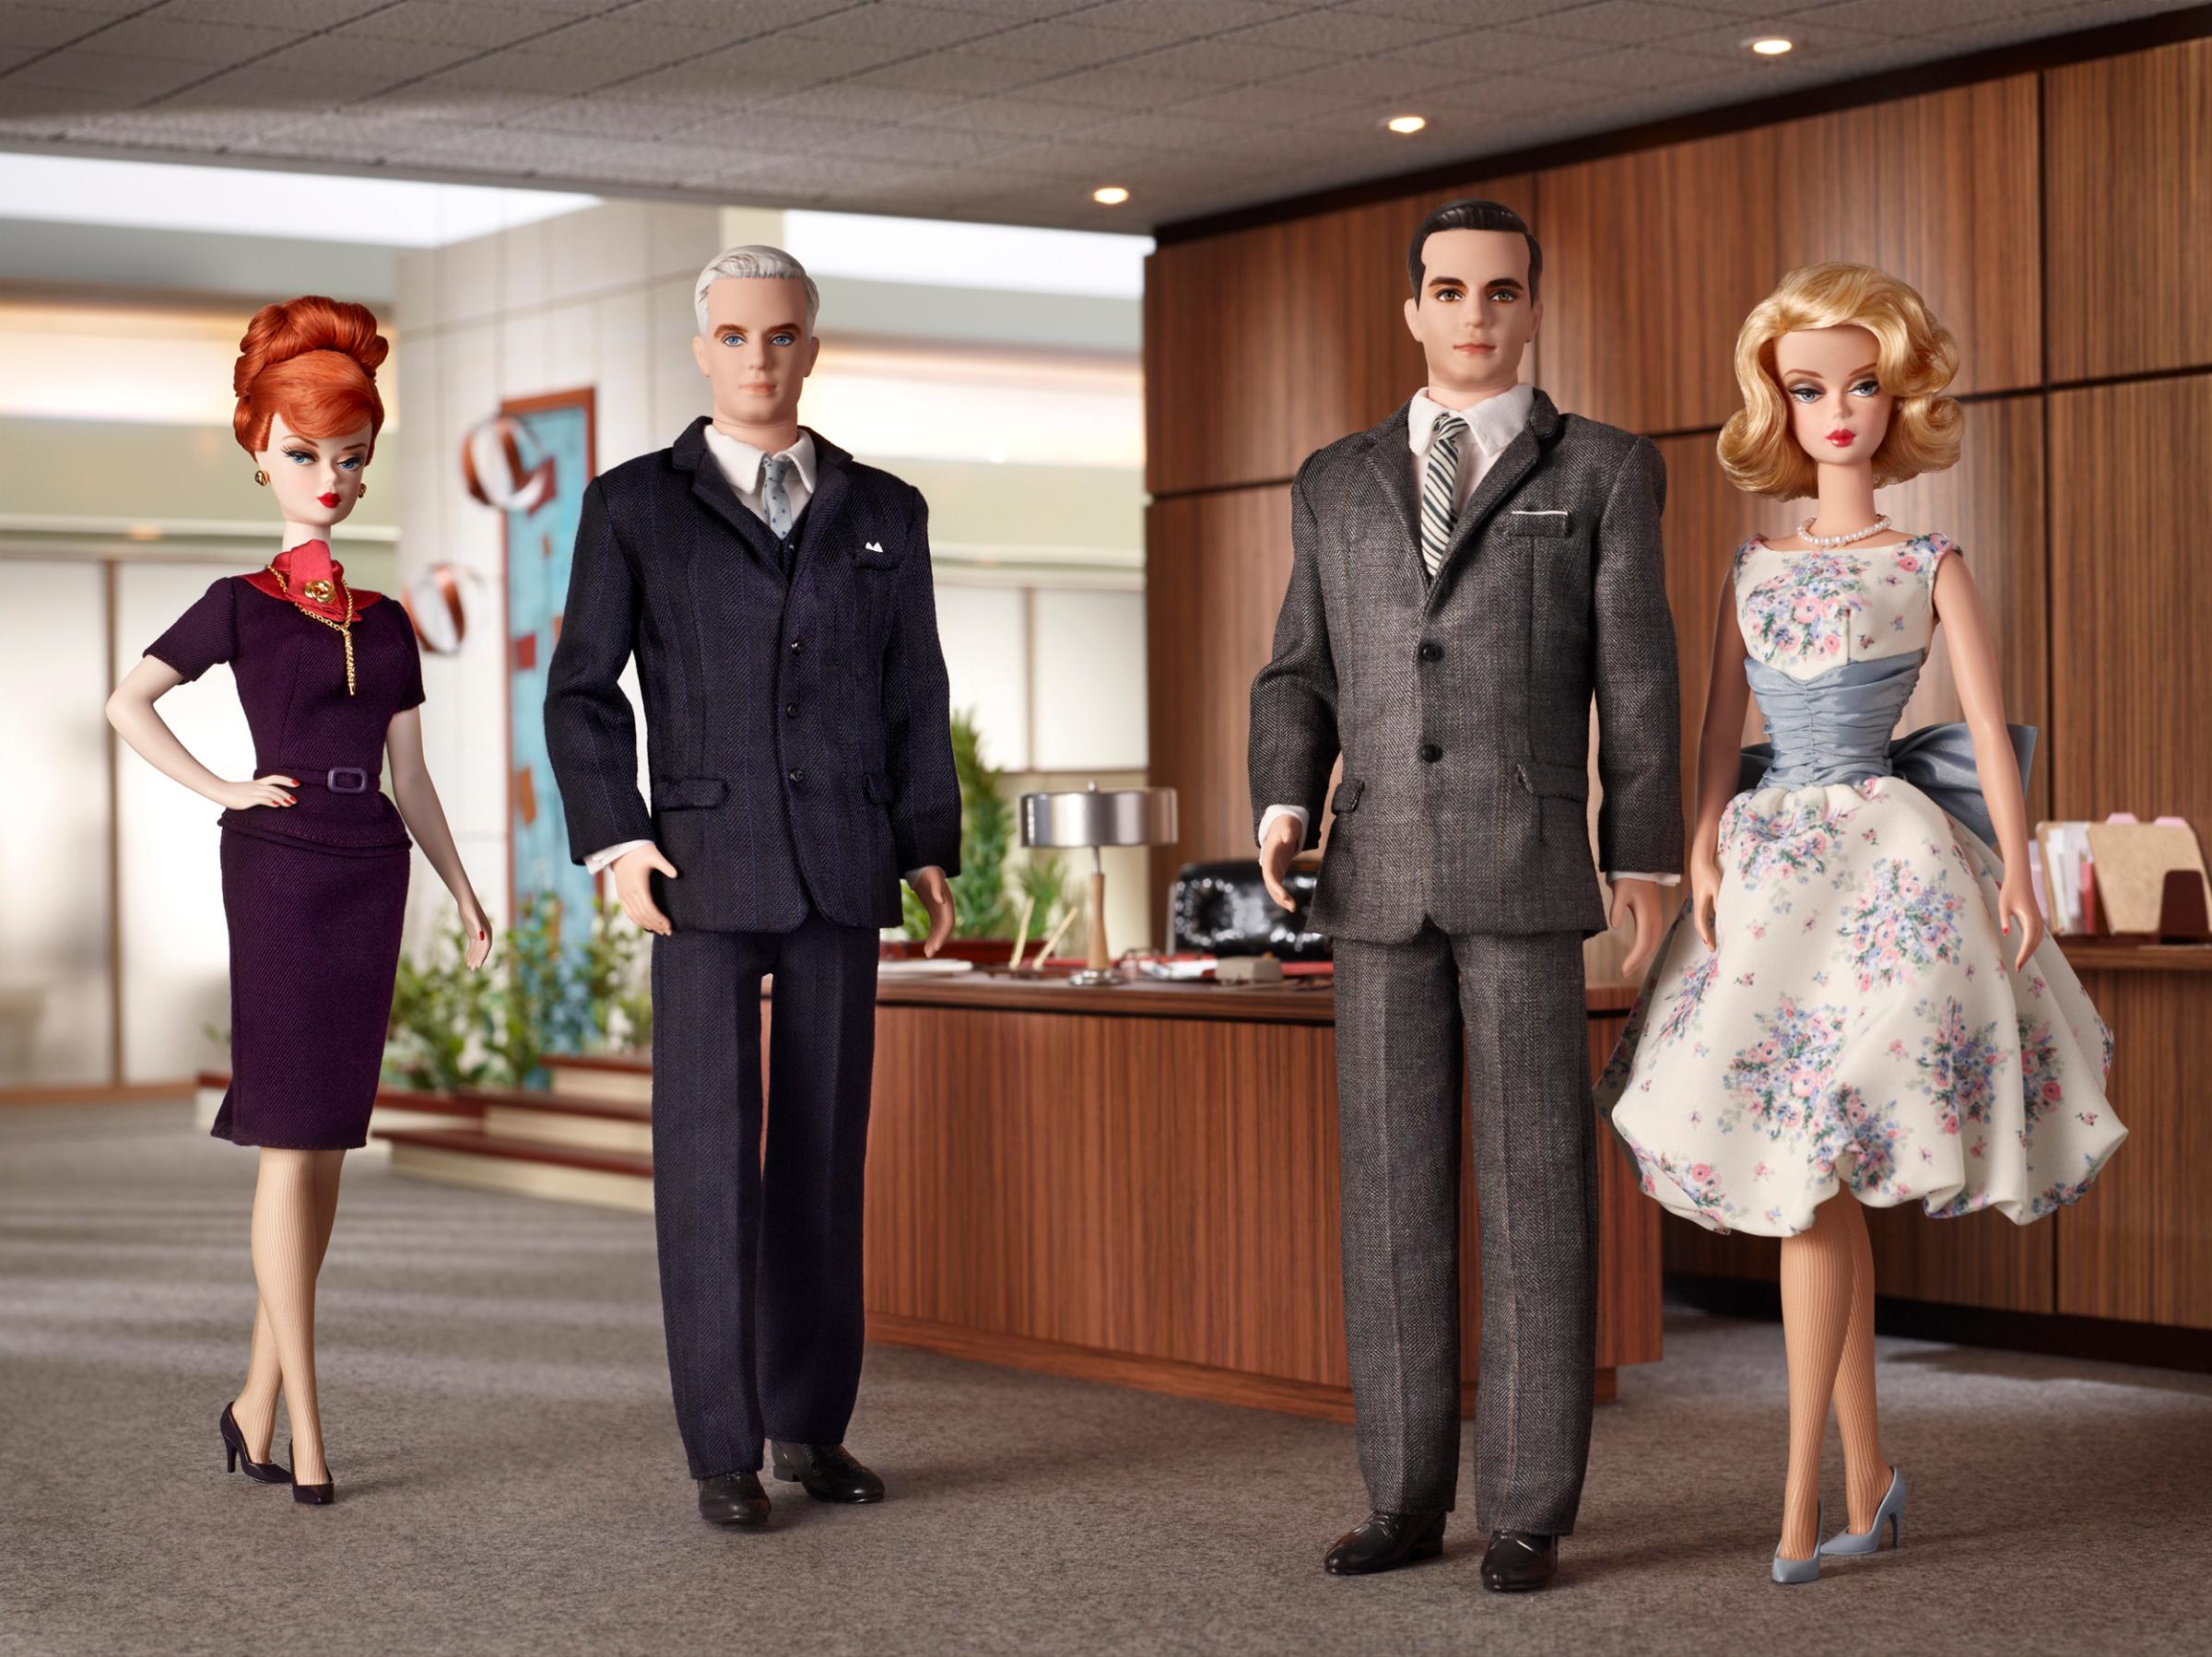 Joan Holloway, Roger Sterling, Don Draper and Betty Draper Dolls from AMC's "Mad Men" released in 2010.